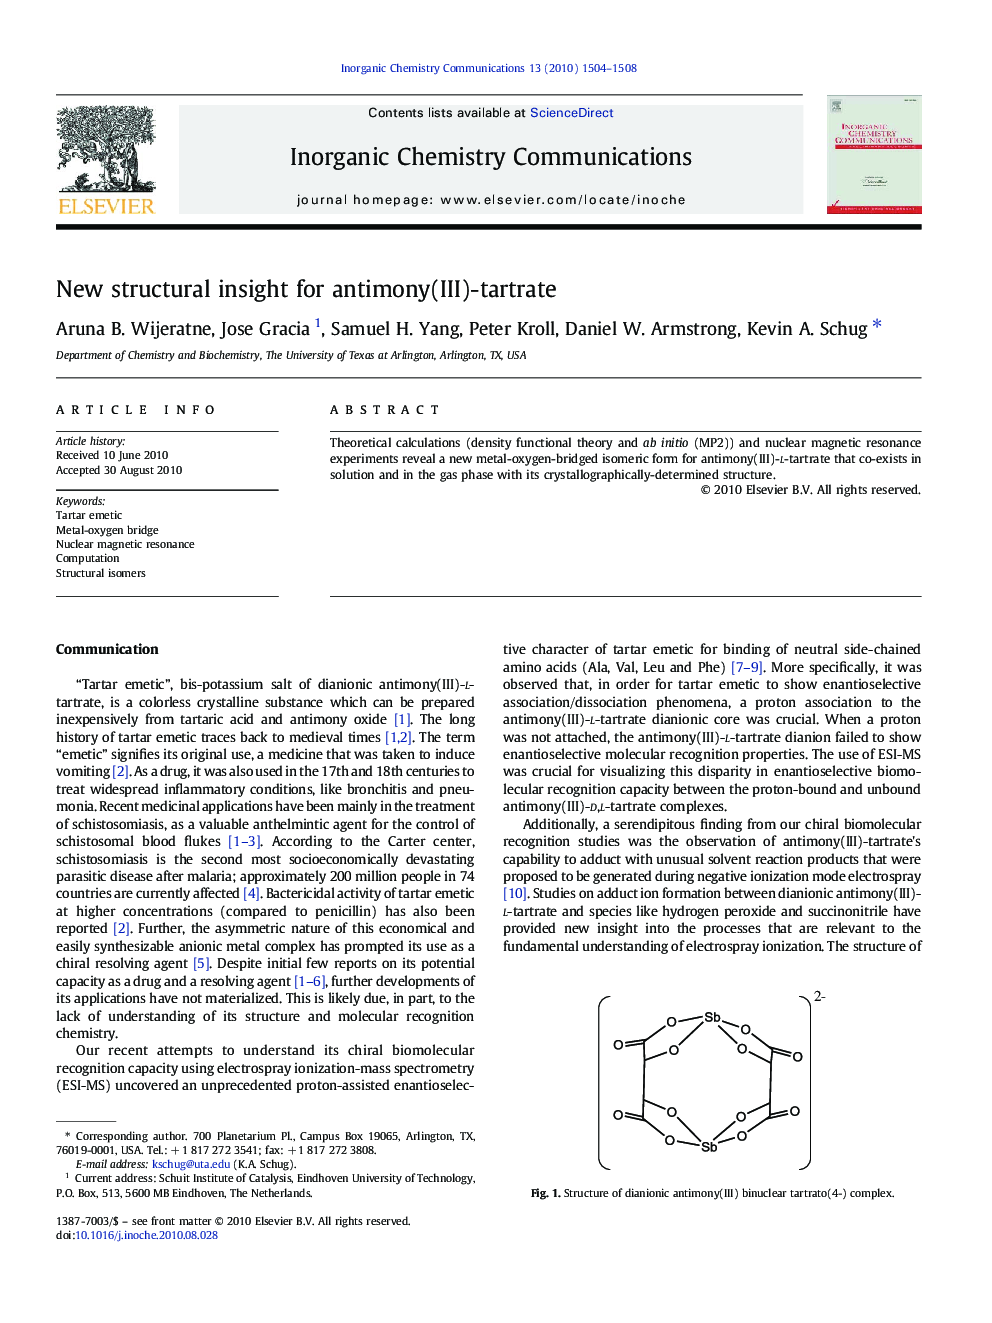 New structural insight for antimony(III)-tartrate